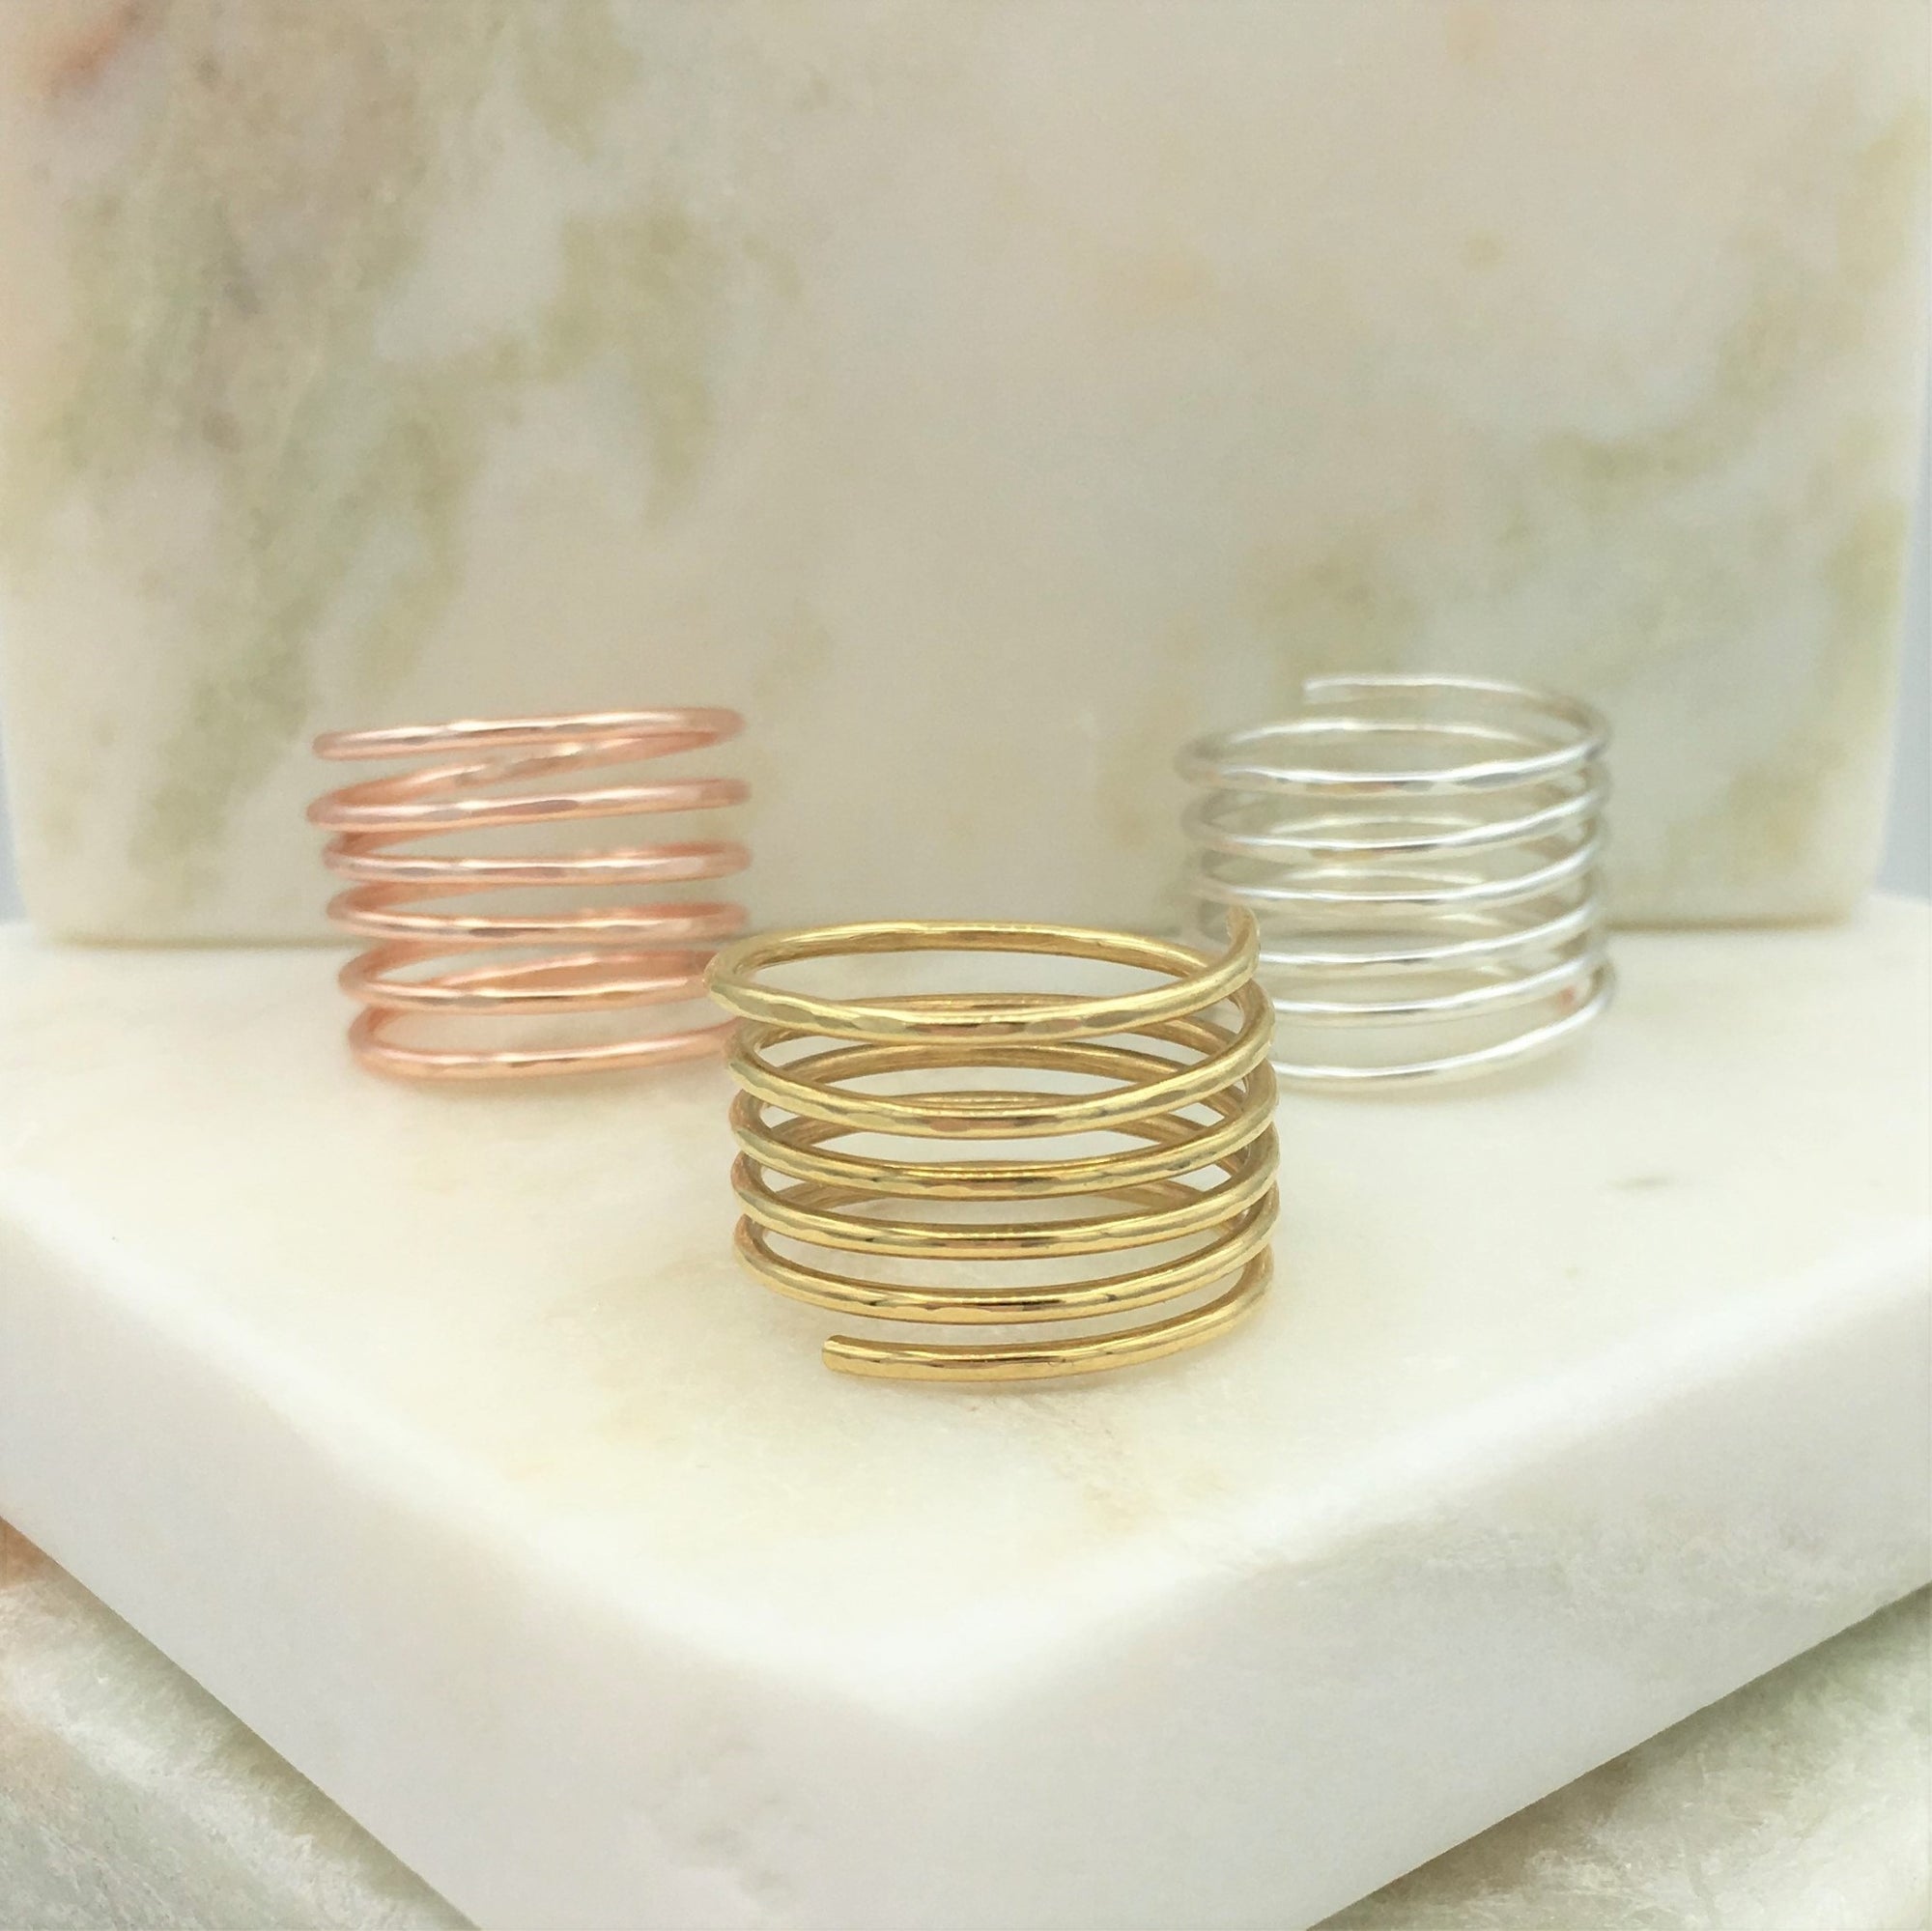 ADJUSTABLE COIL RING COLLECTION